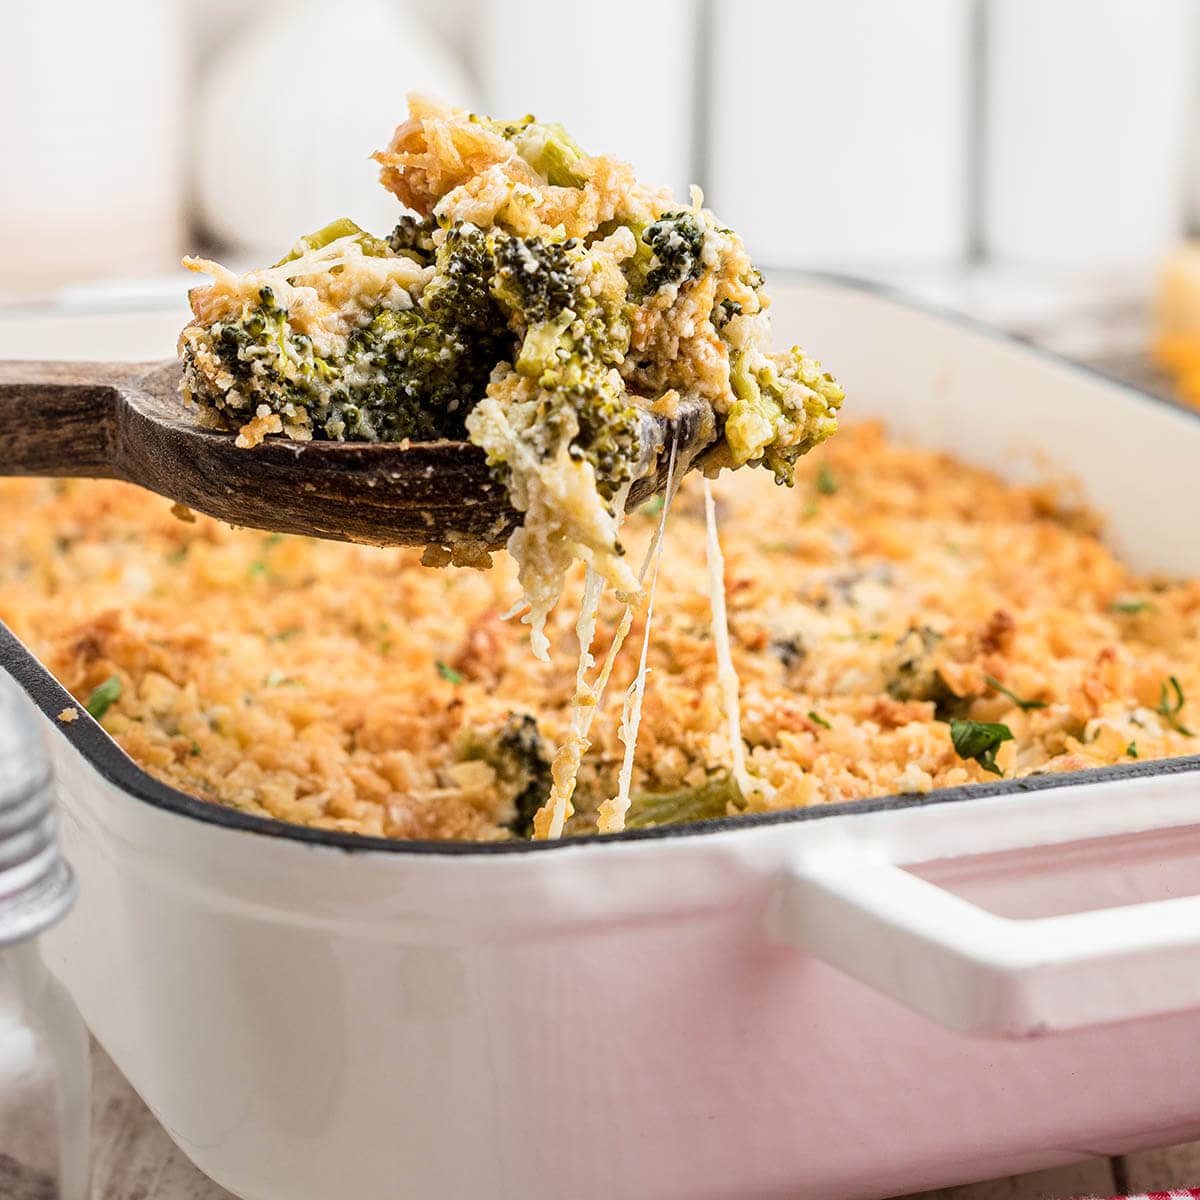 Broccoli casserole with crispy topping in baking dish with serving spoon.